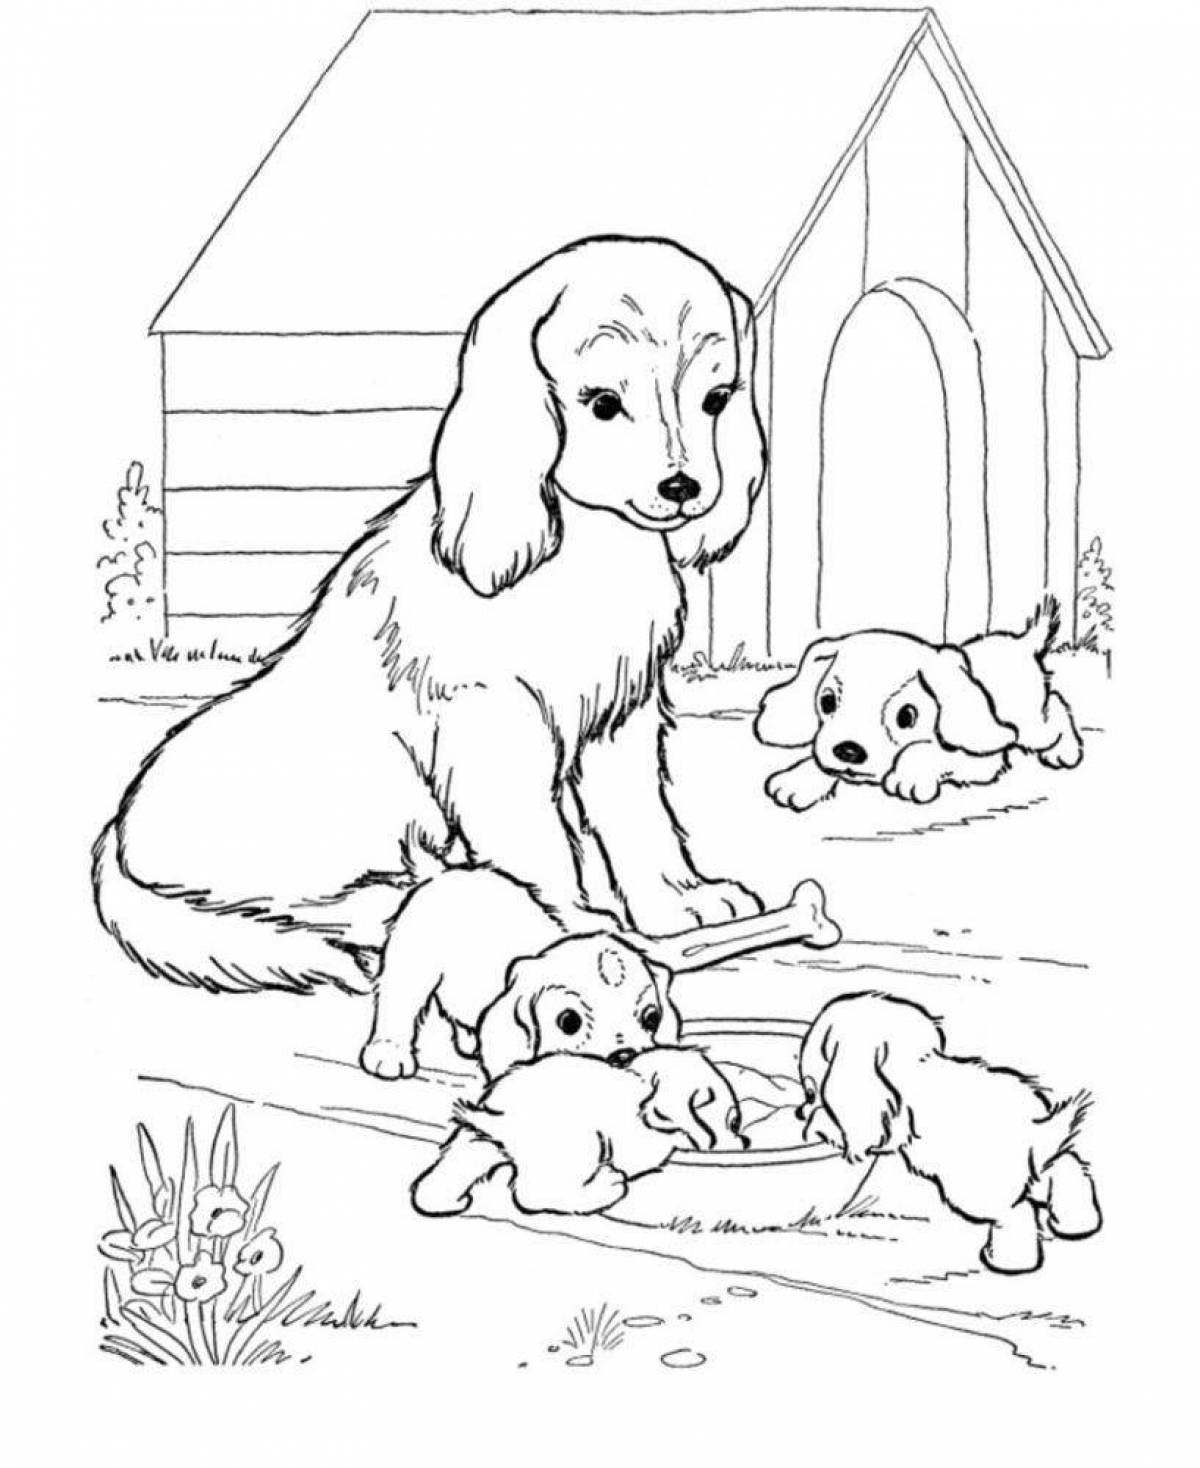 Soft dog coloring book for kids